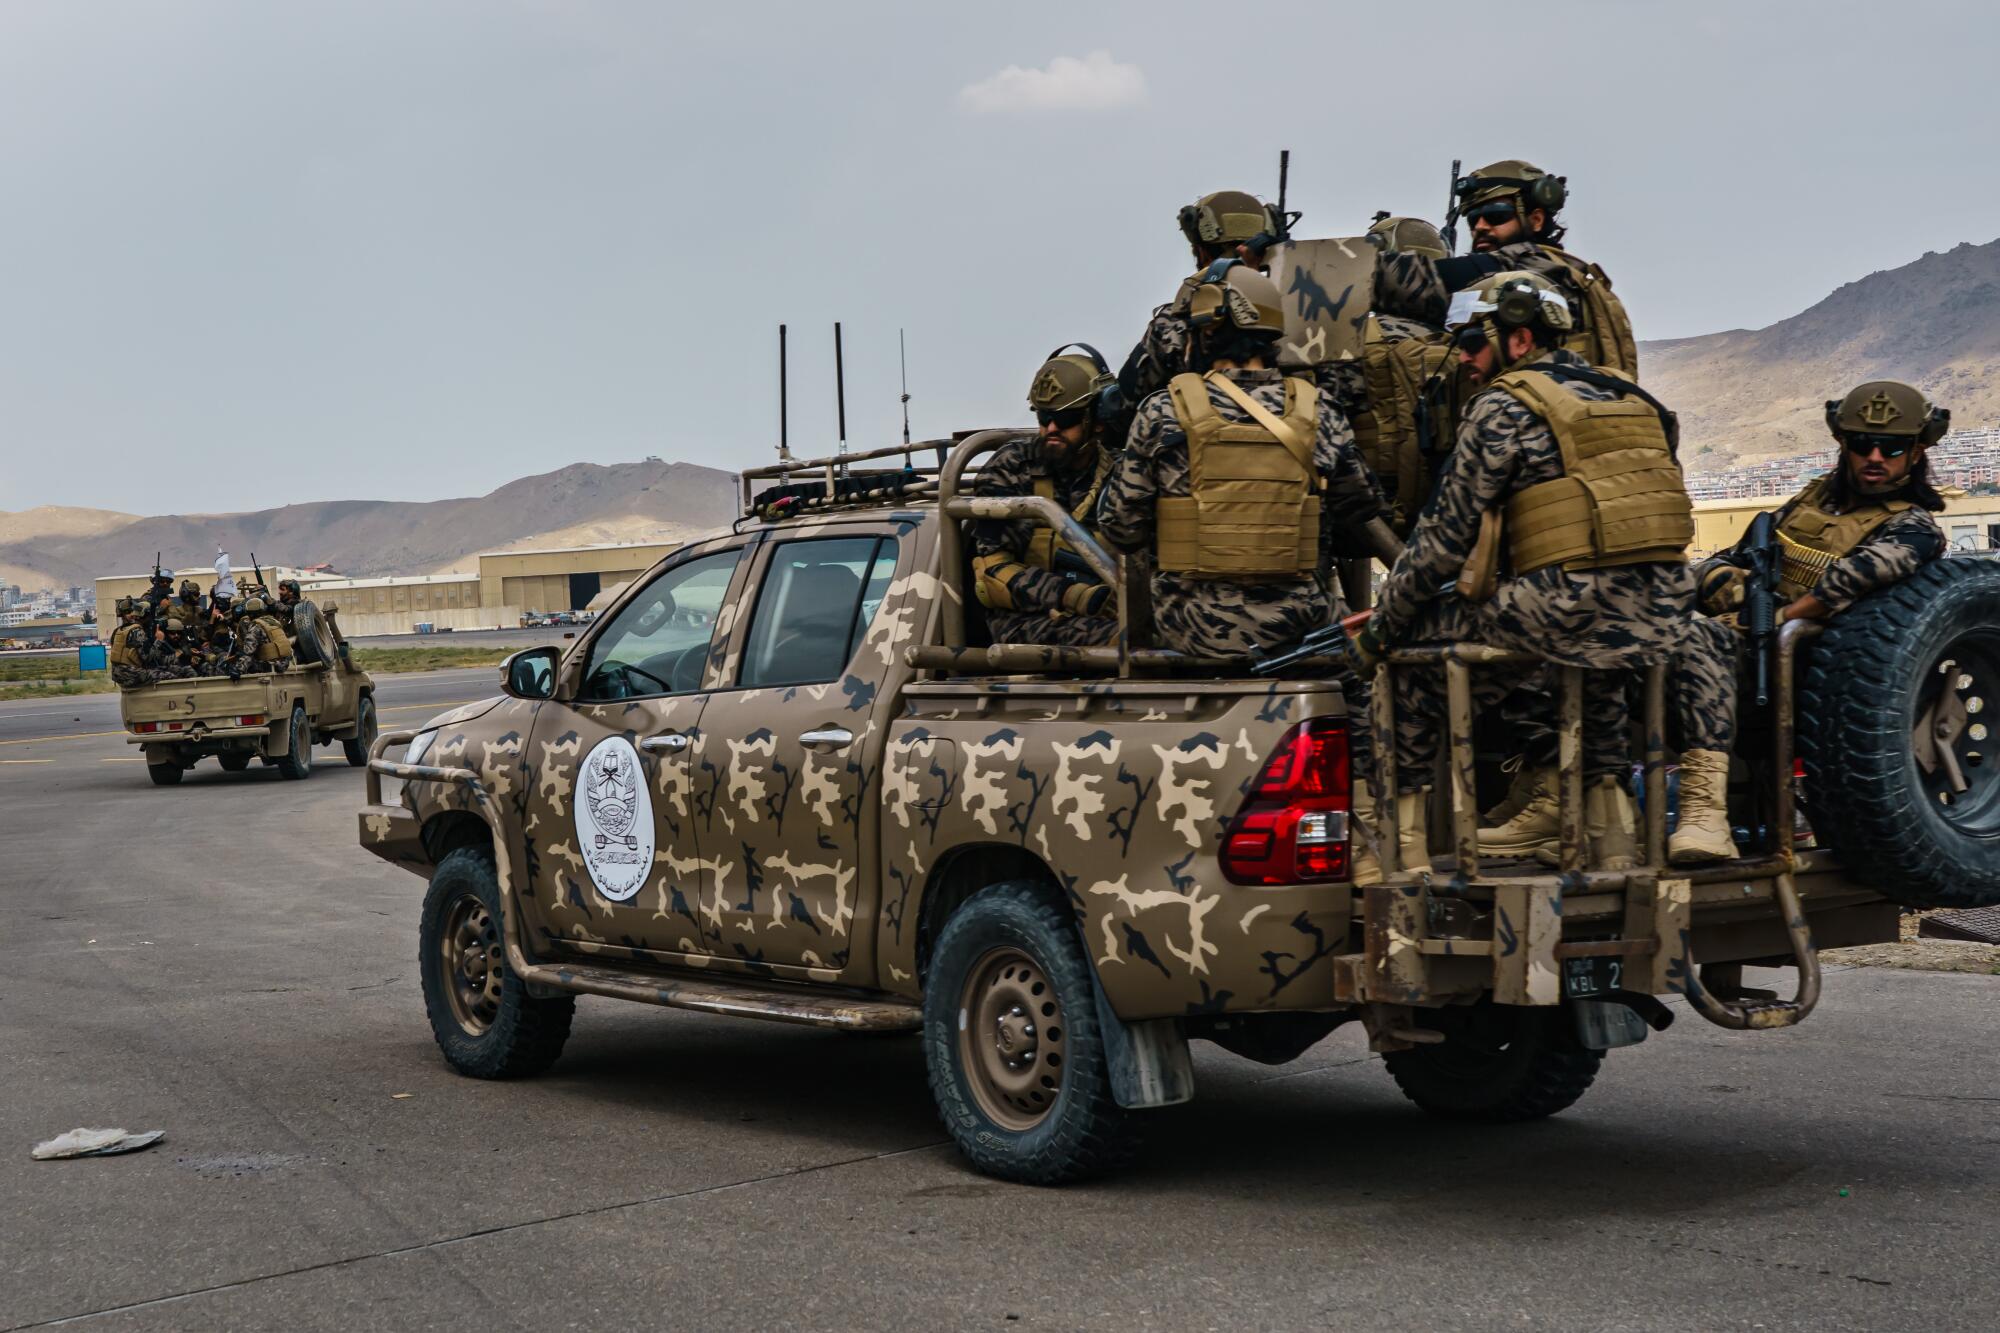 Taliban fighters ride in camouflage pickup trucks